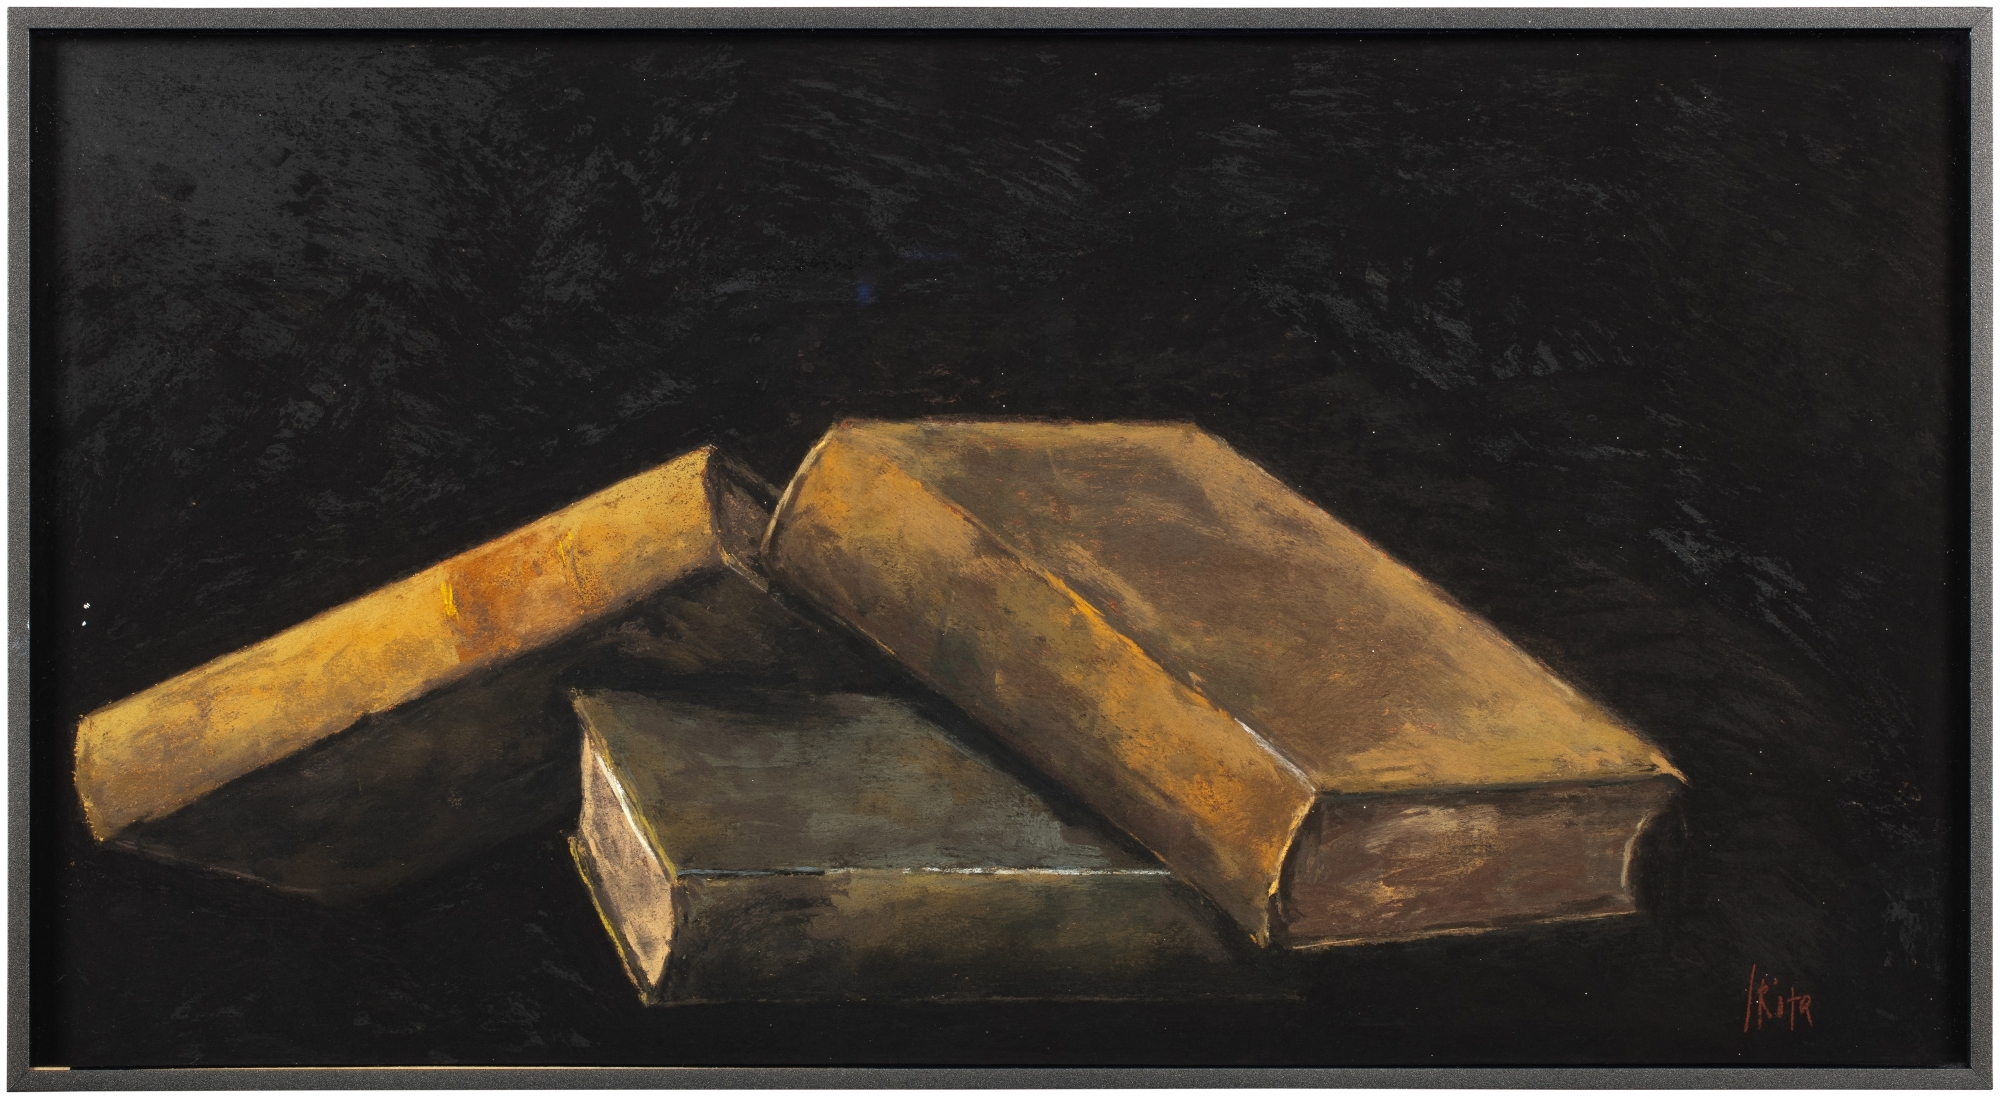 Artwork by Pierre Skira, Nature morte aux livres, Made of pastel on cardboard